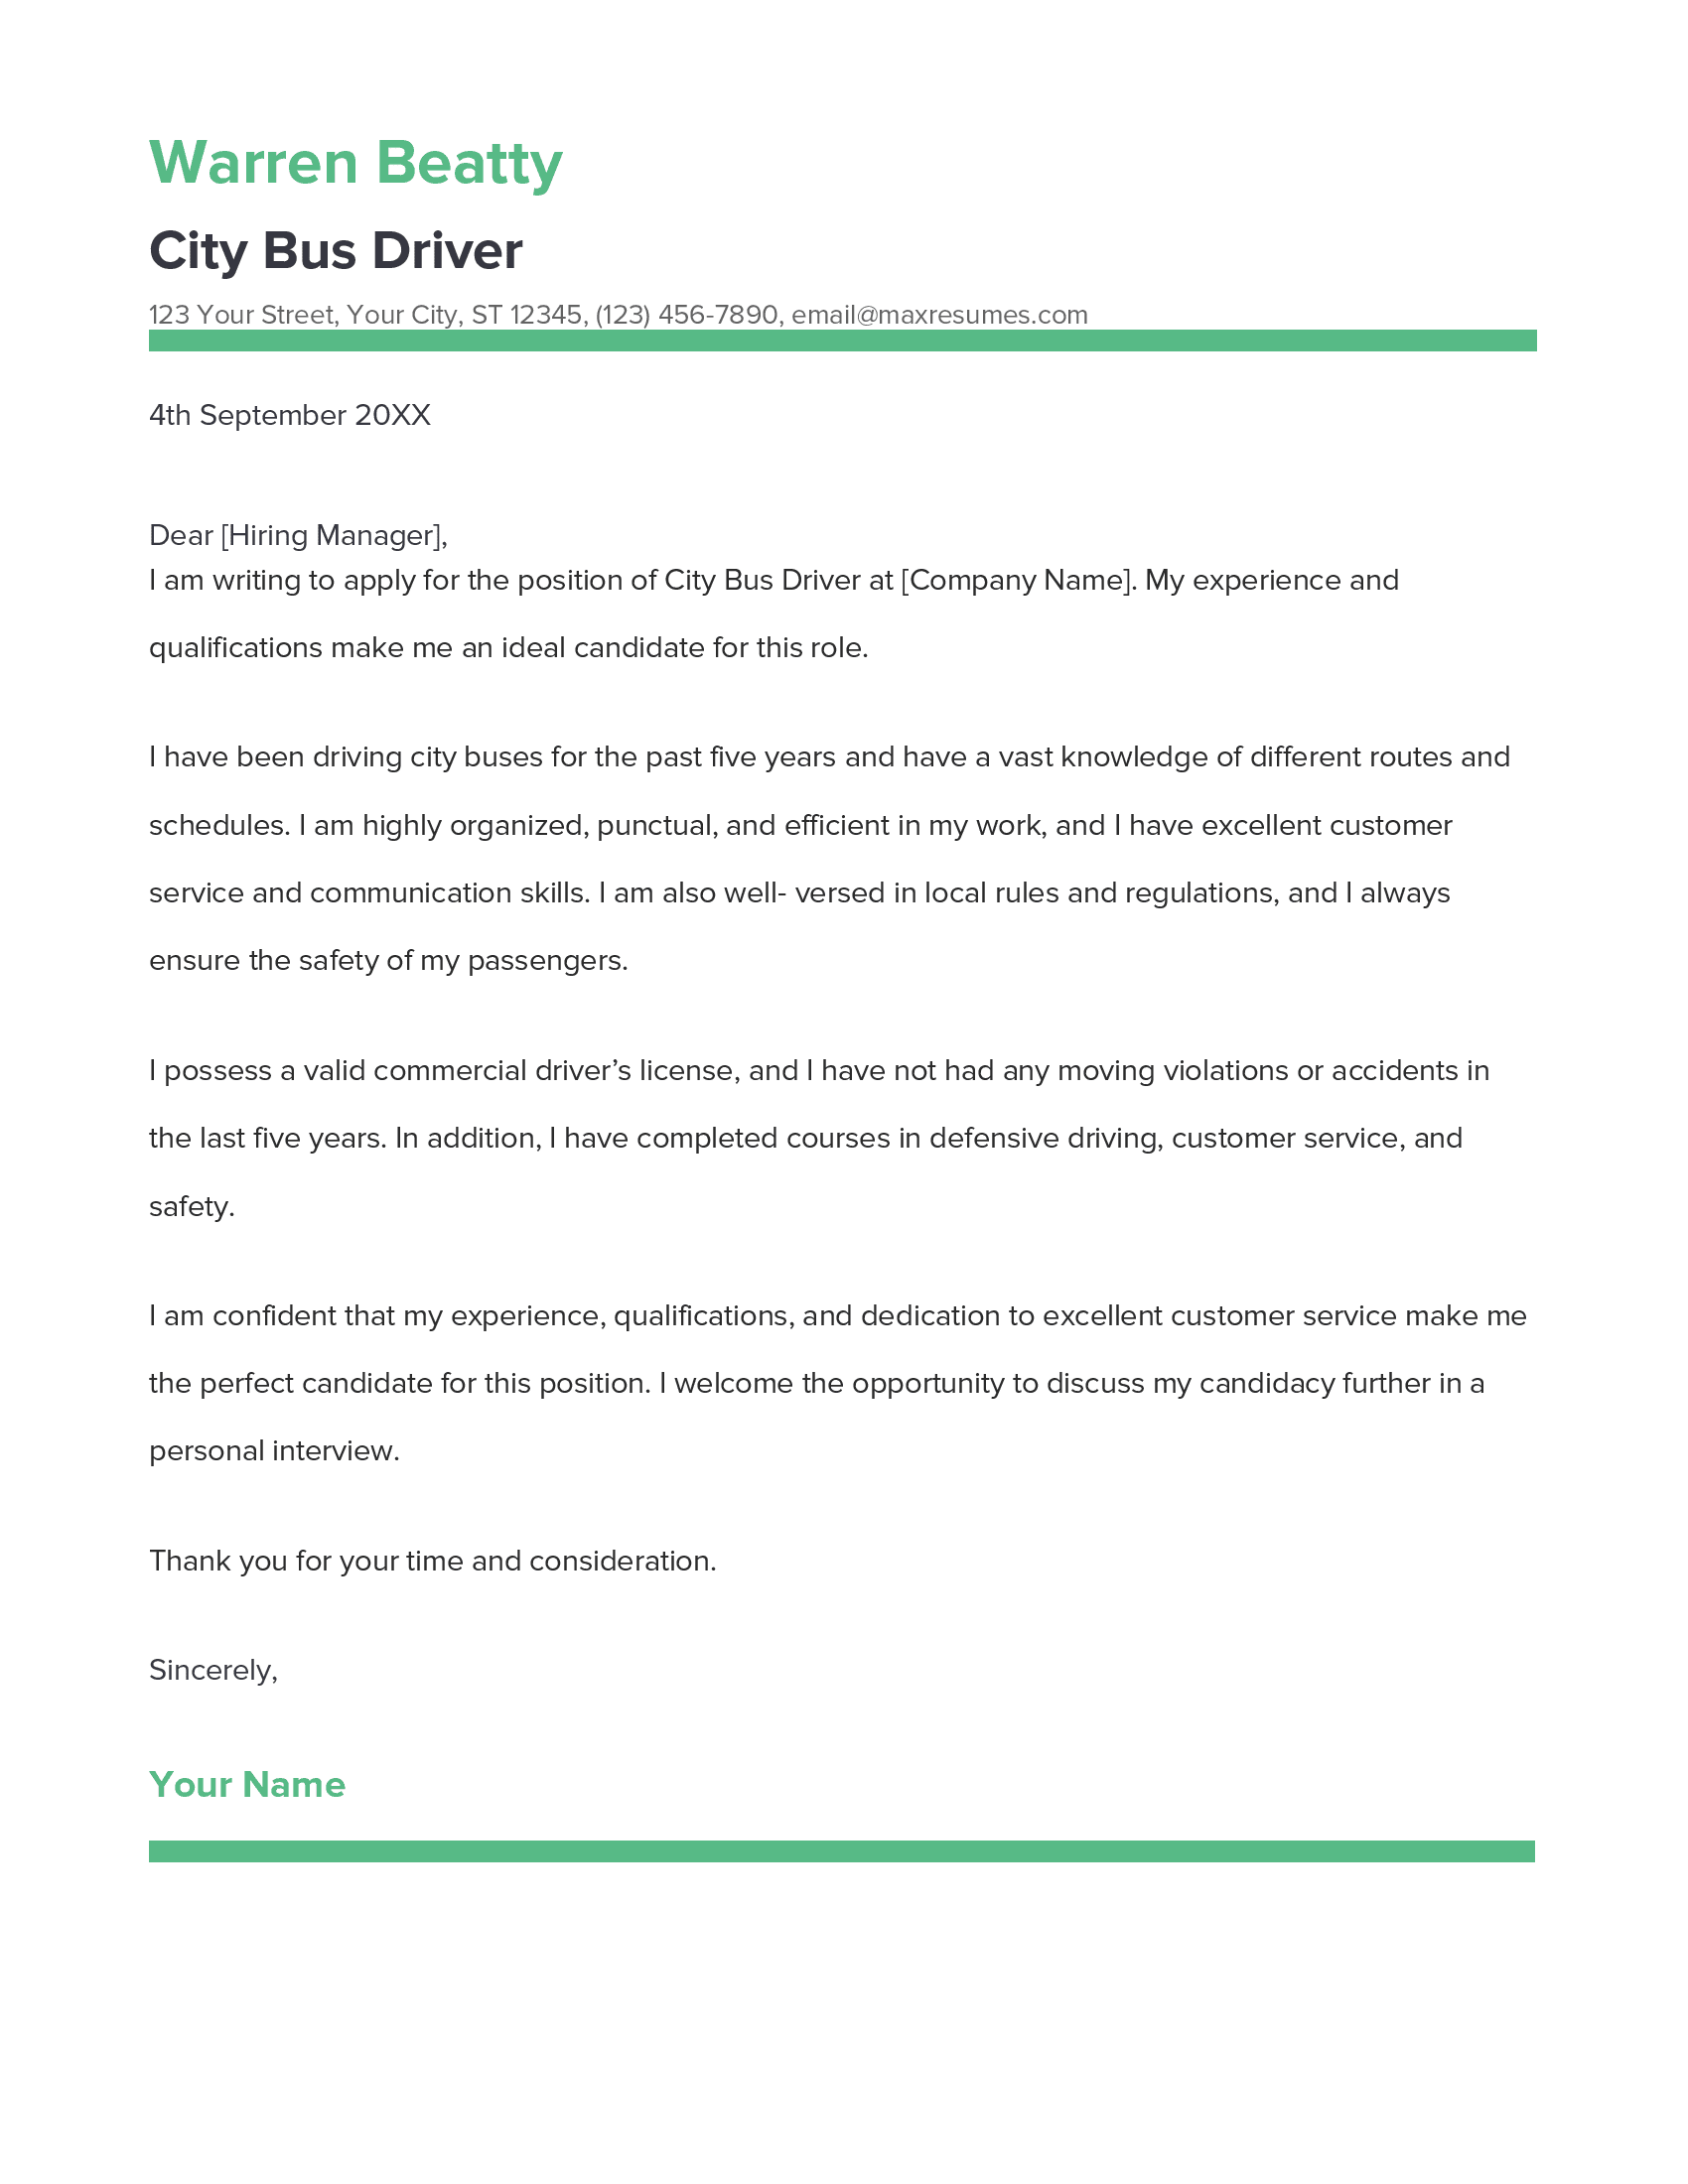 City Bus Driver Cover Letter Example